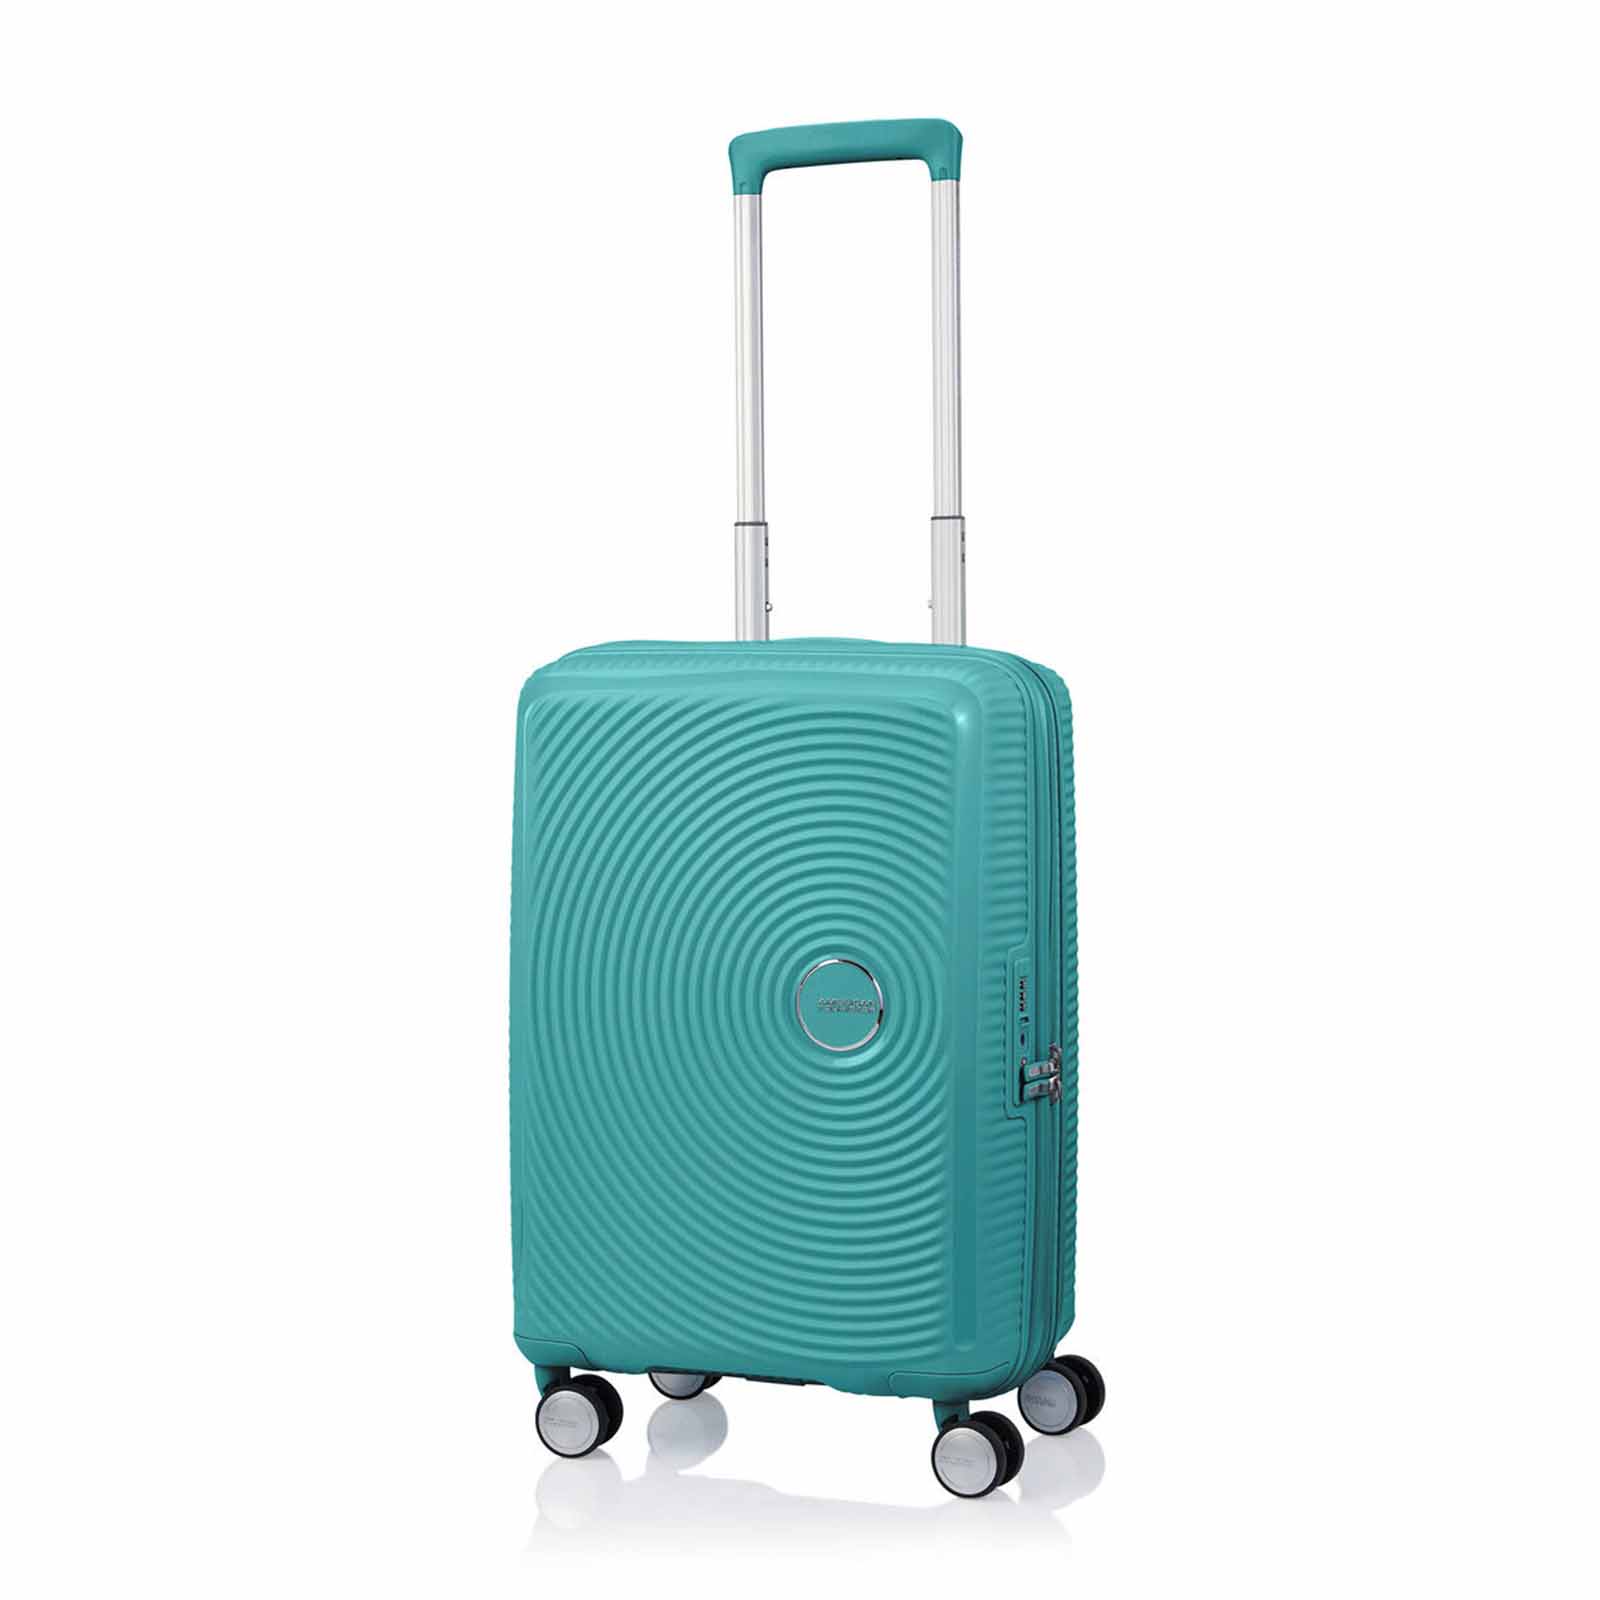 American-Tourister-Curio-2-55cm-Carry-On-Suitcase-Jade-Green-Front-Angle